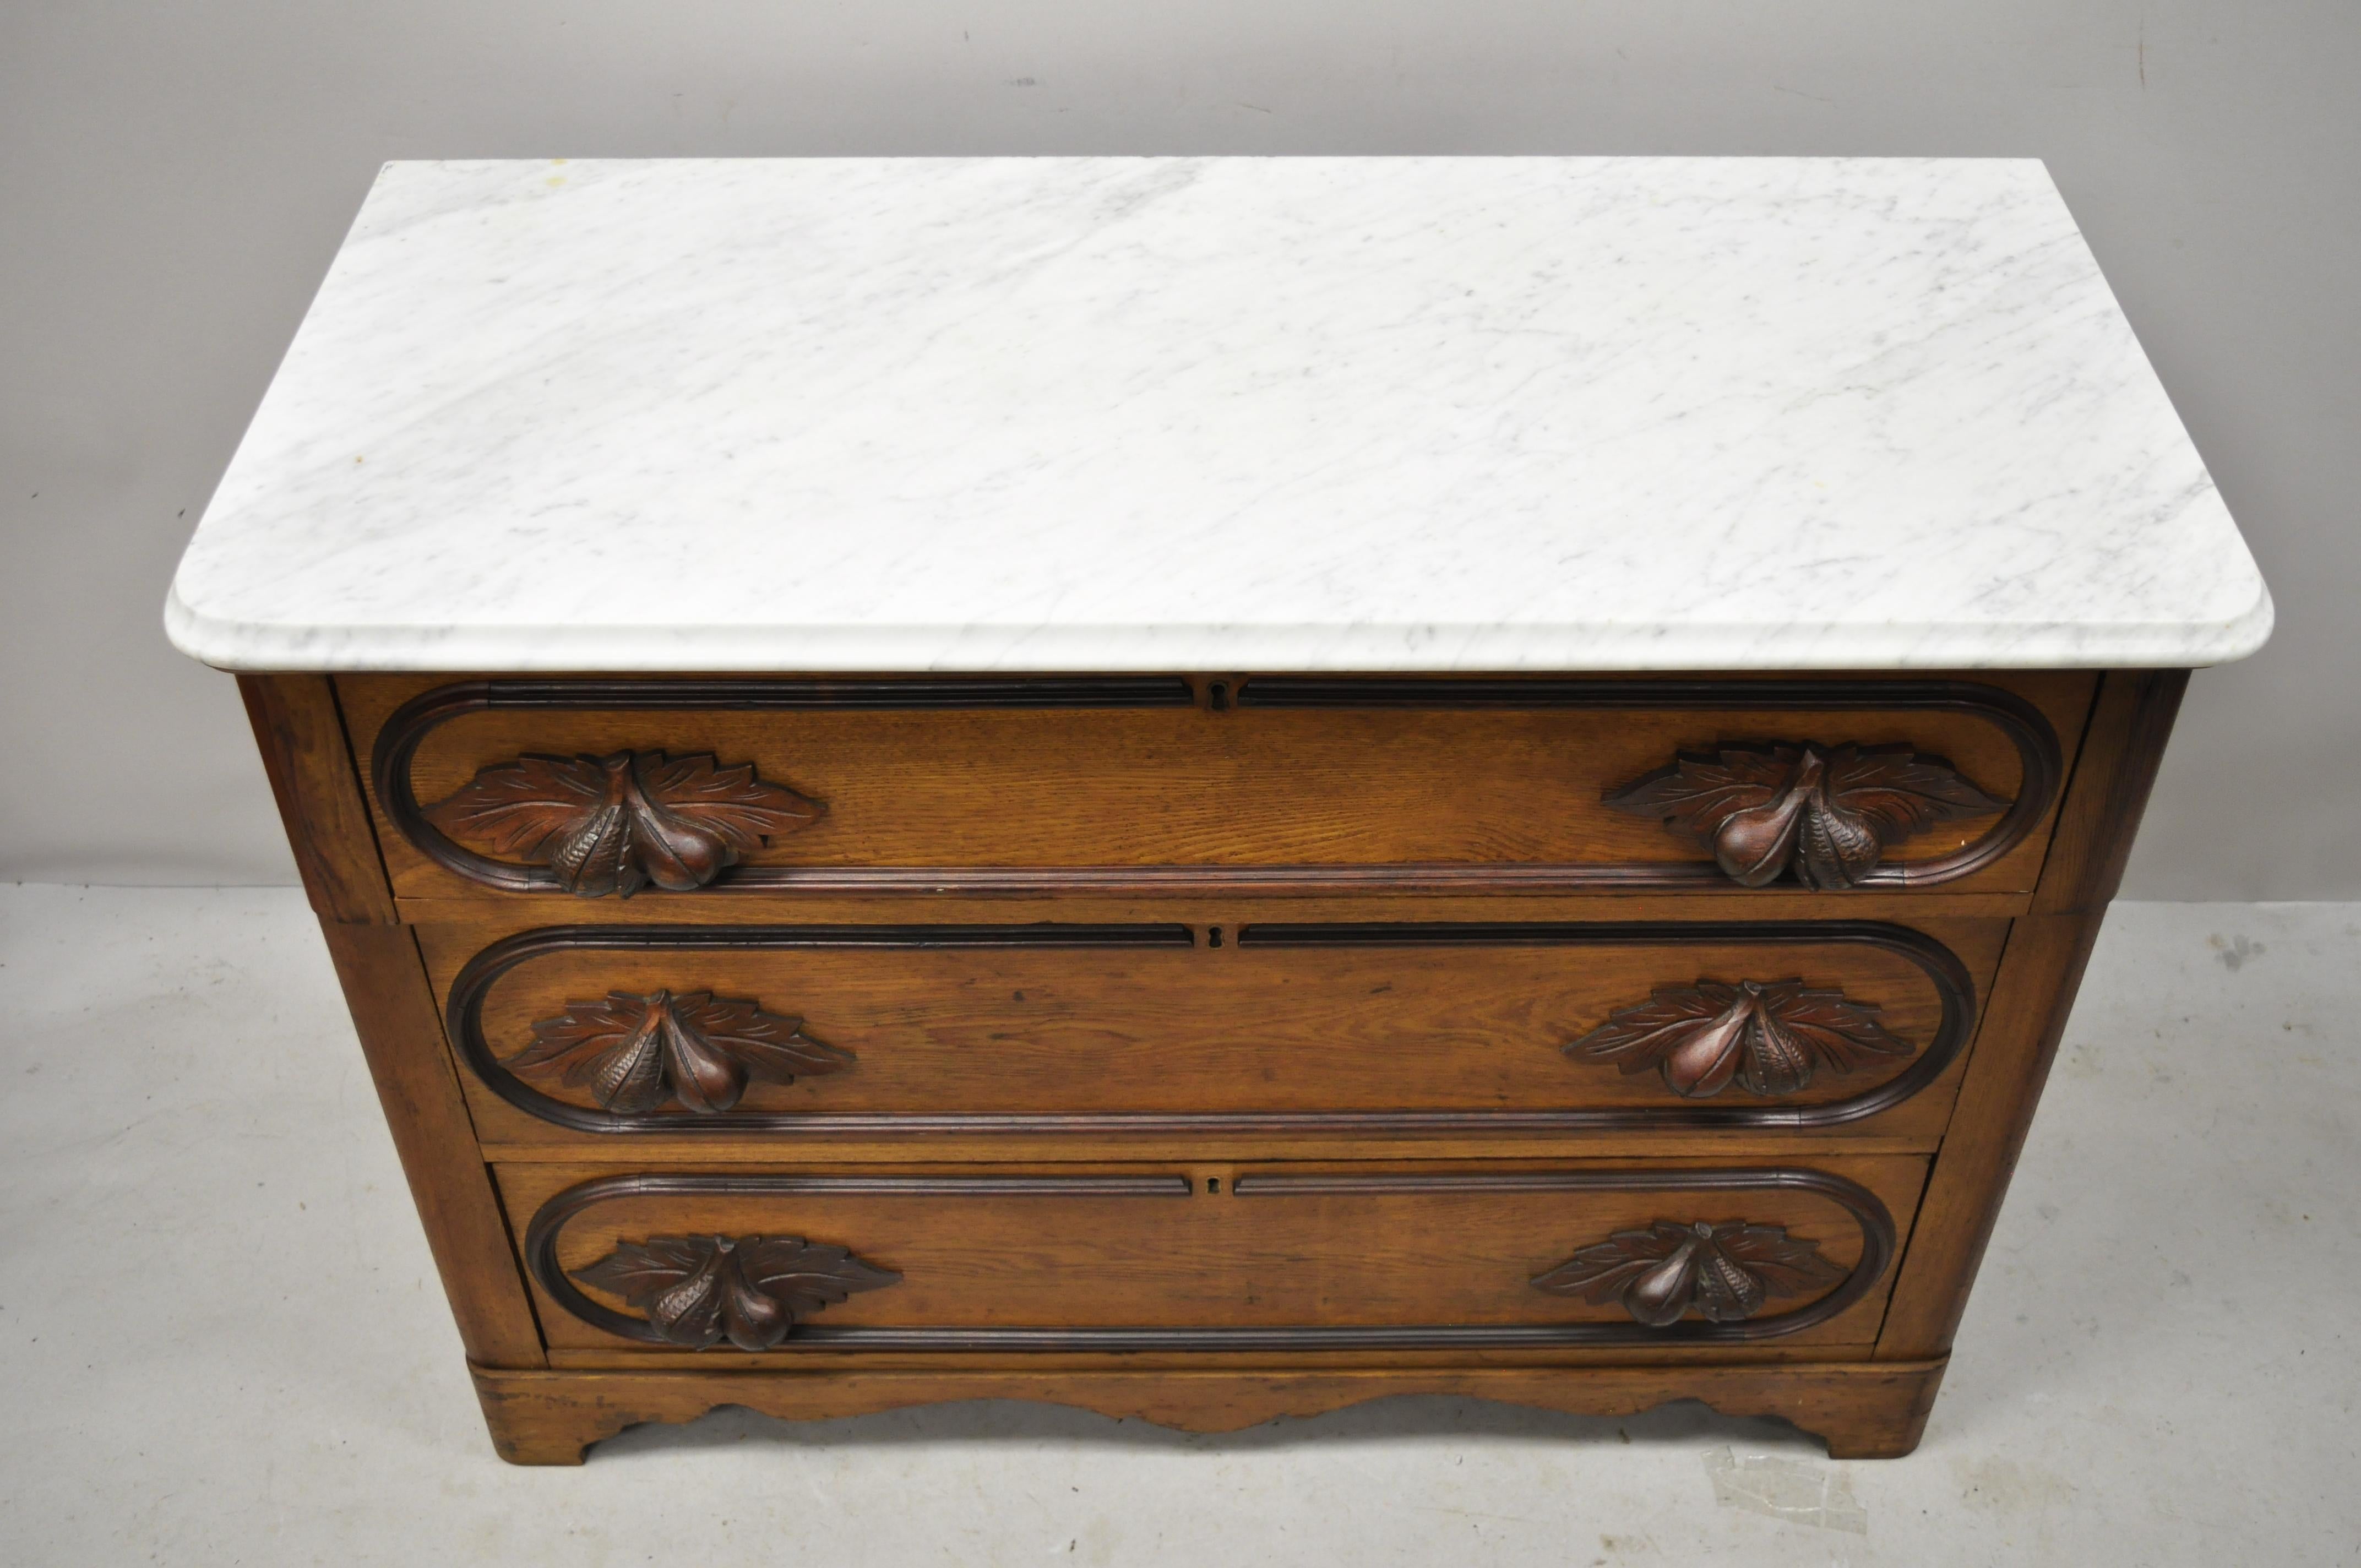 Antique Eastlake Victorian marble-top chestnut dresser with fruit carved pulls. Item features marble top, fruit and maple leaf carved drawer pulls, beautiful wood grain, no key, but unlocked, 3 dovetailed drawers, very nice antique item, circa late